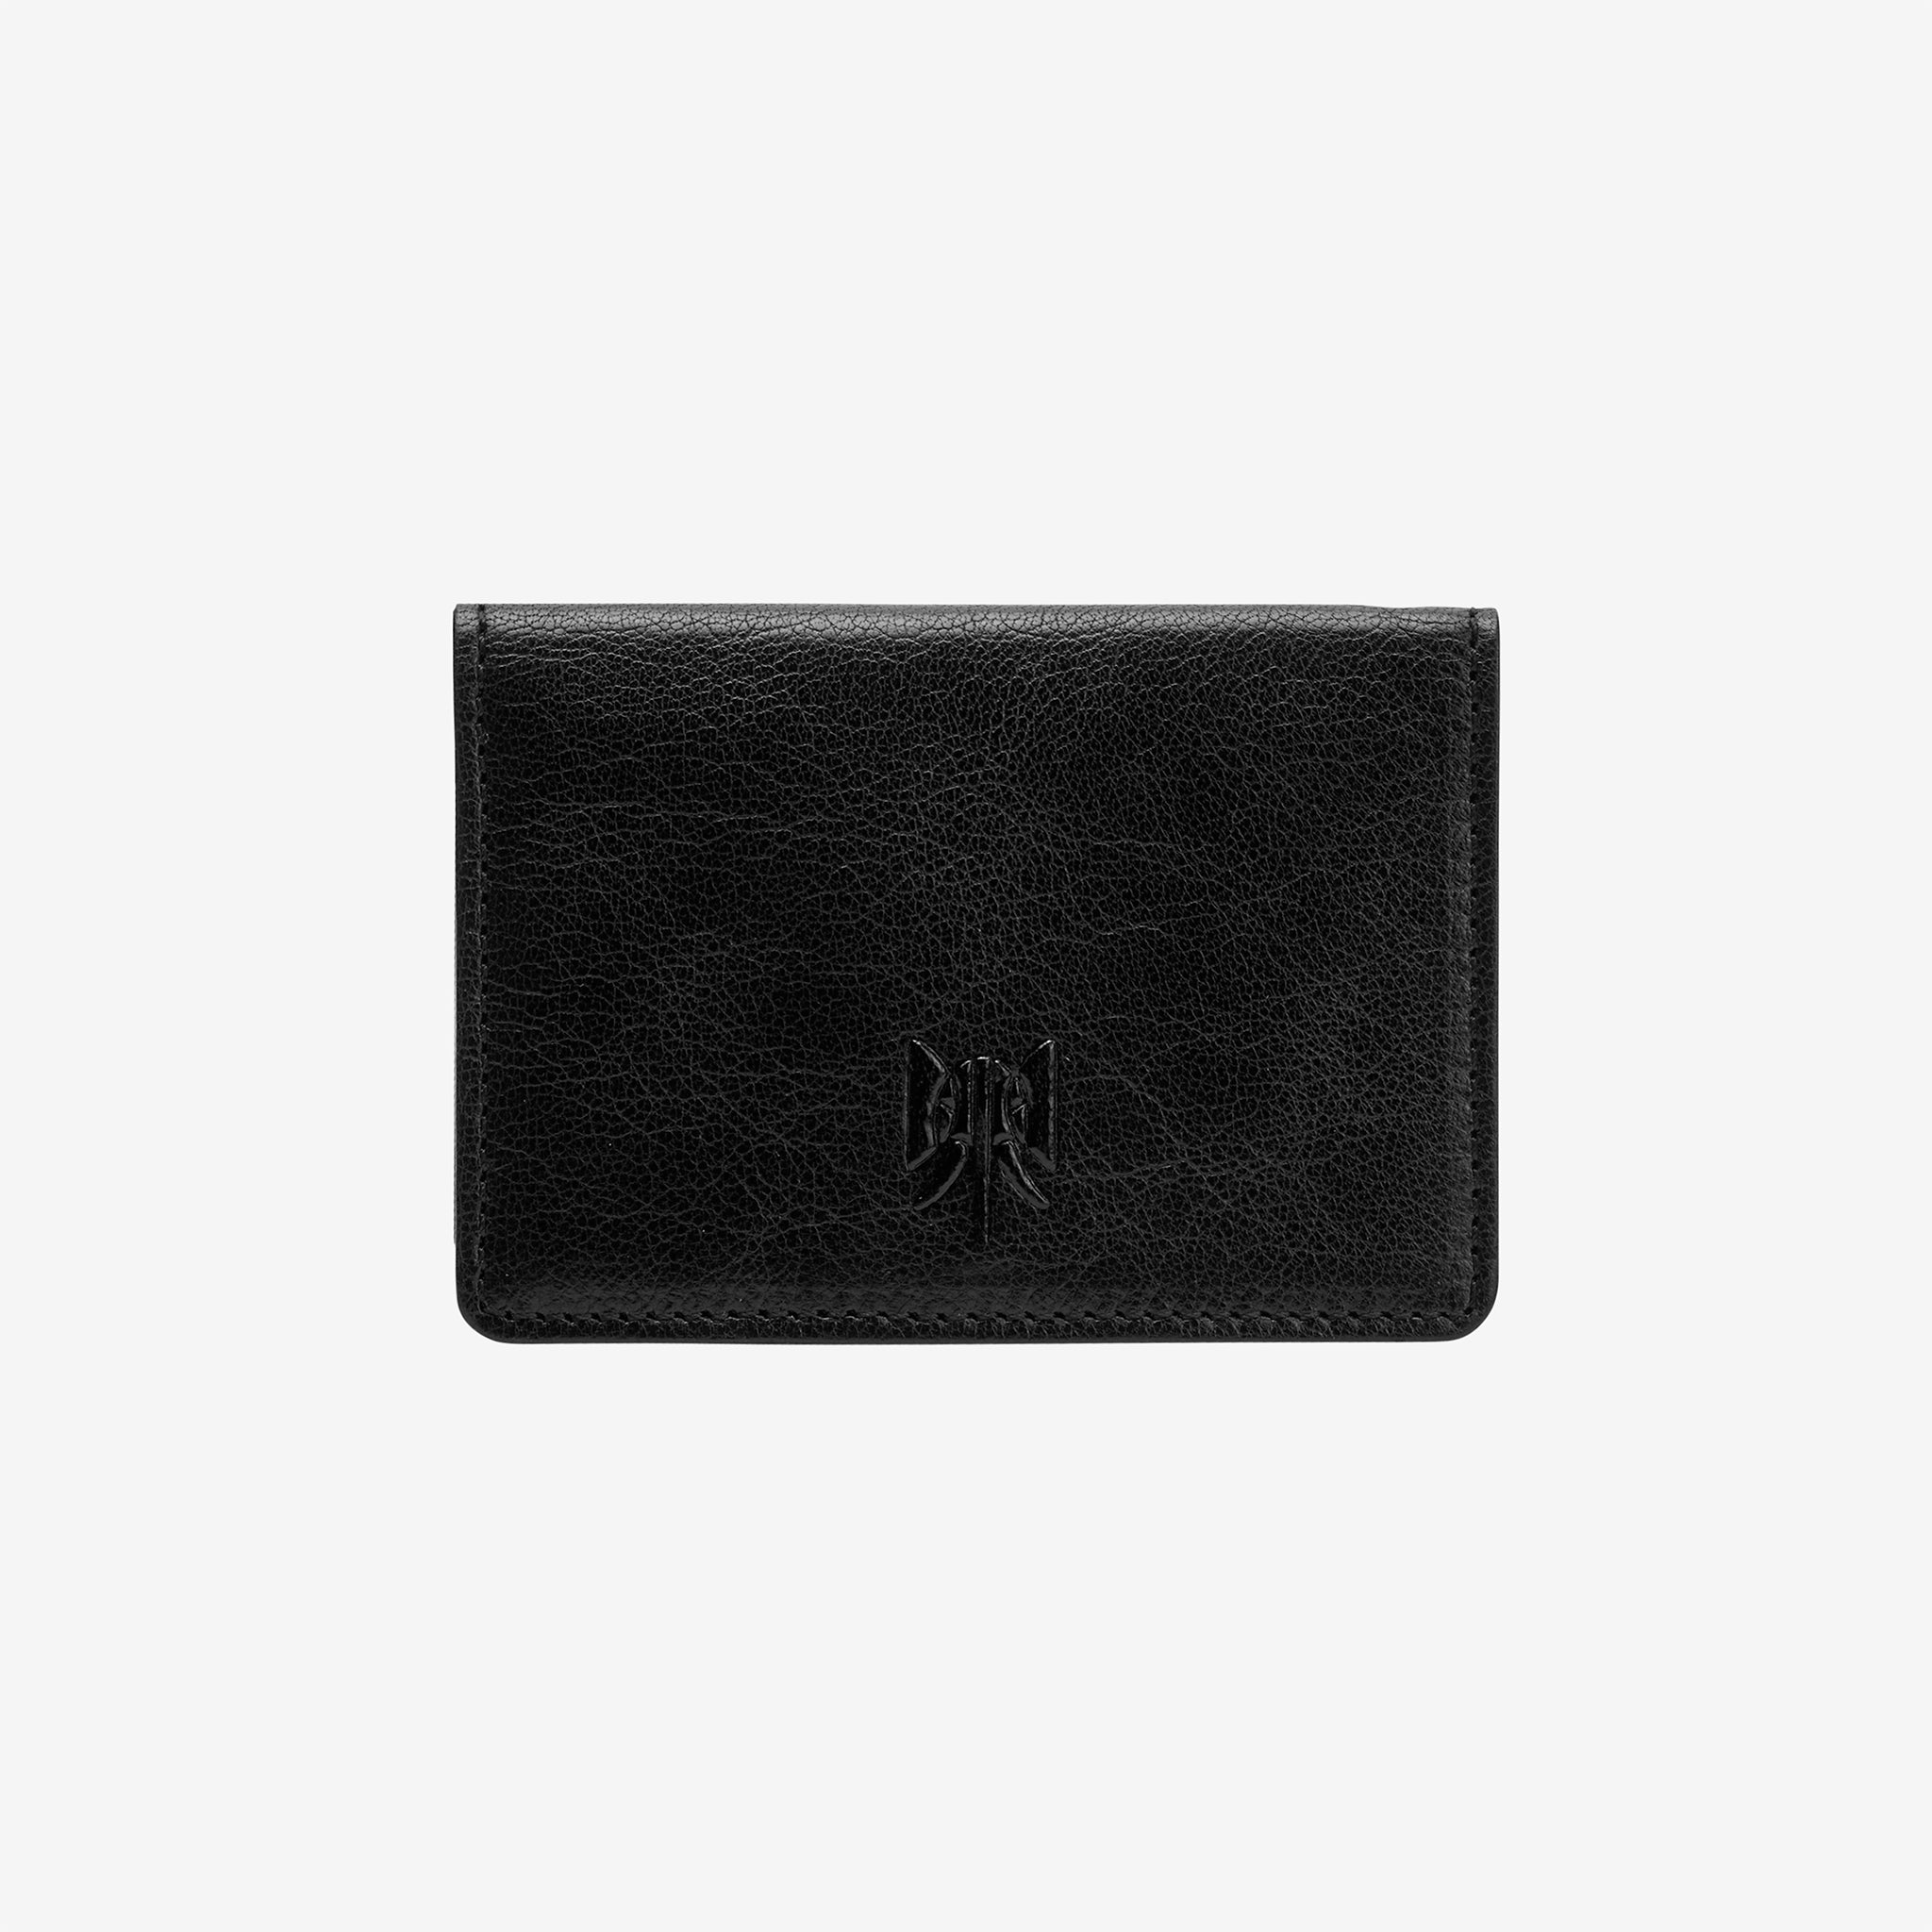 Siam Gusseted Business Card Case Black/French Blue